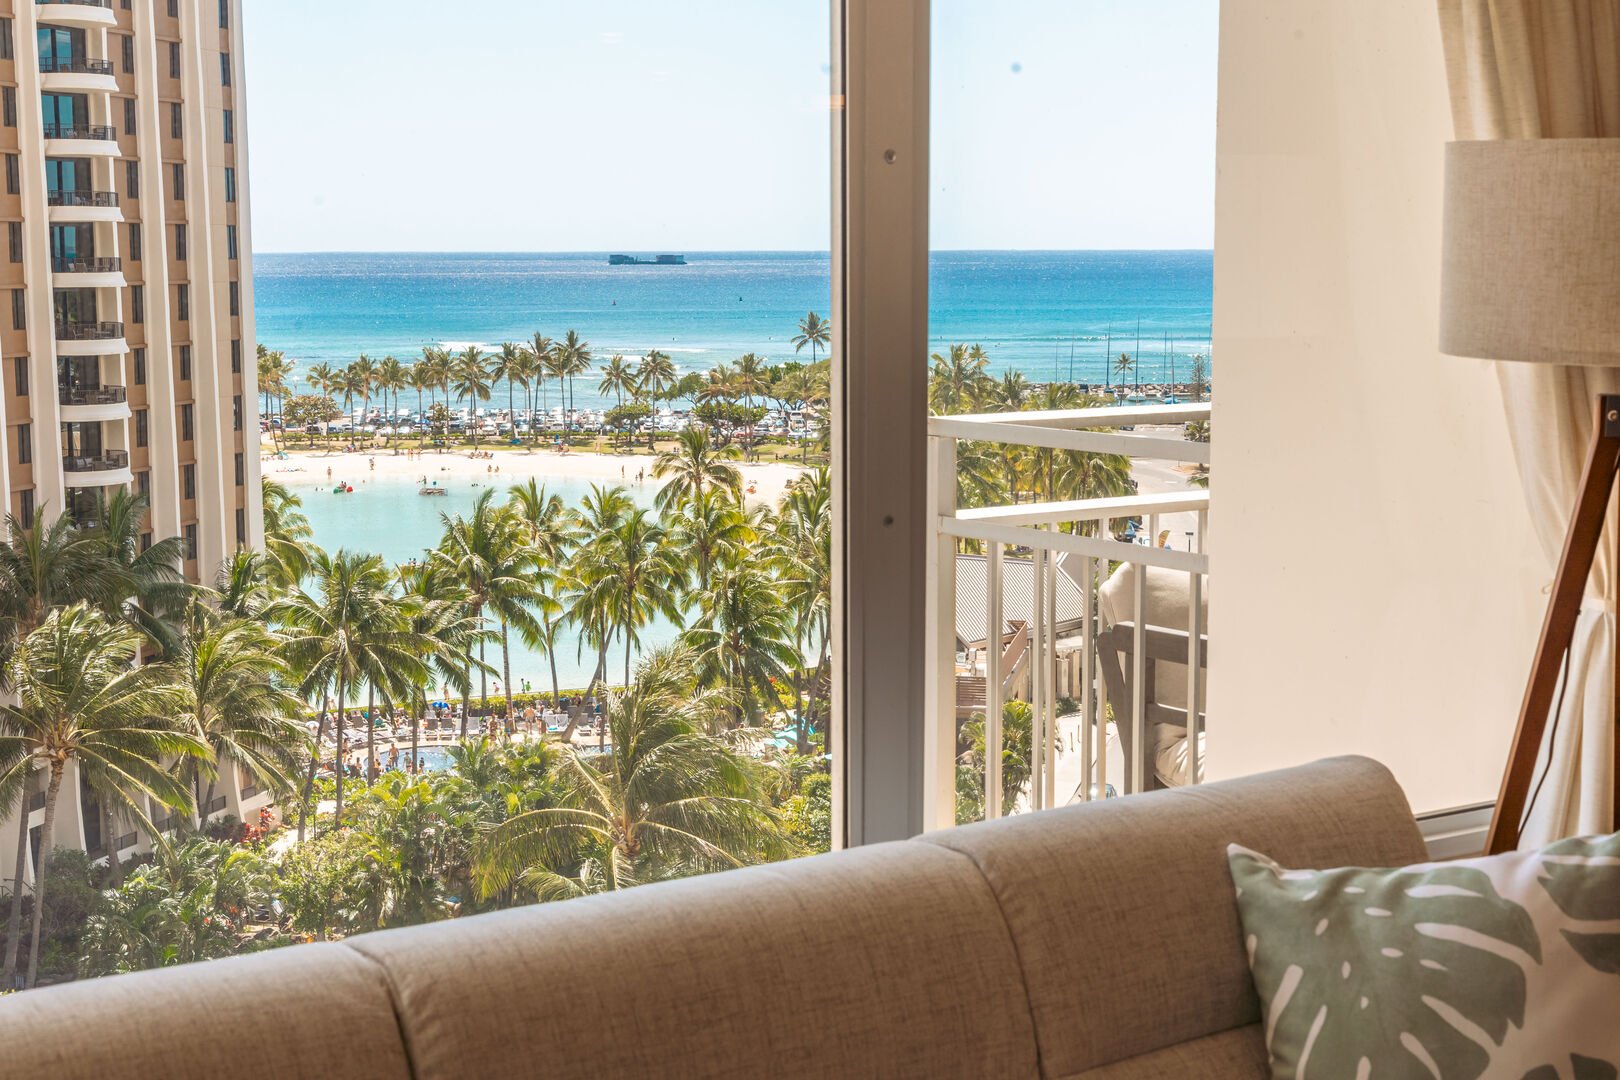 Enjoy the beautiful ocean view from your living room.